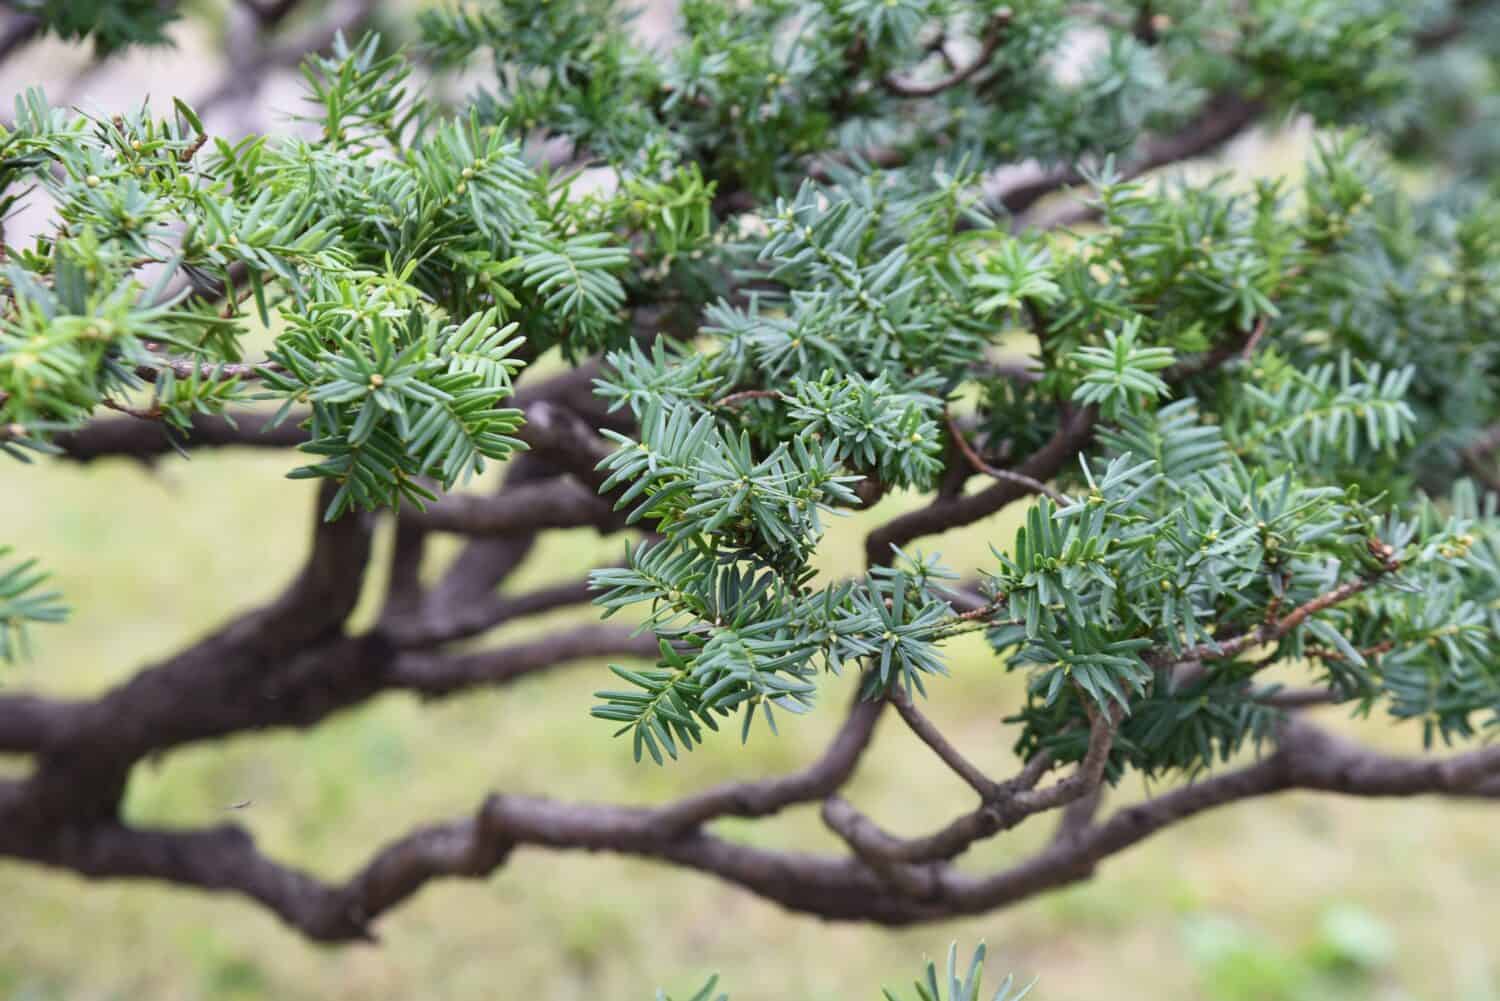 Dwarf japanese yew. Taxaceae evergreen coniferous shrub. It spreads horizontally near the base of the tree and is used for Japanese style gardens ,bonsai and hedges.